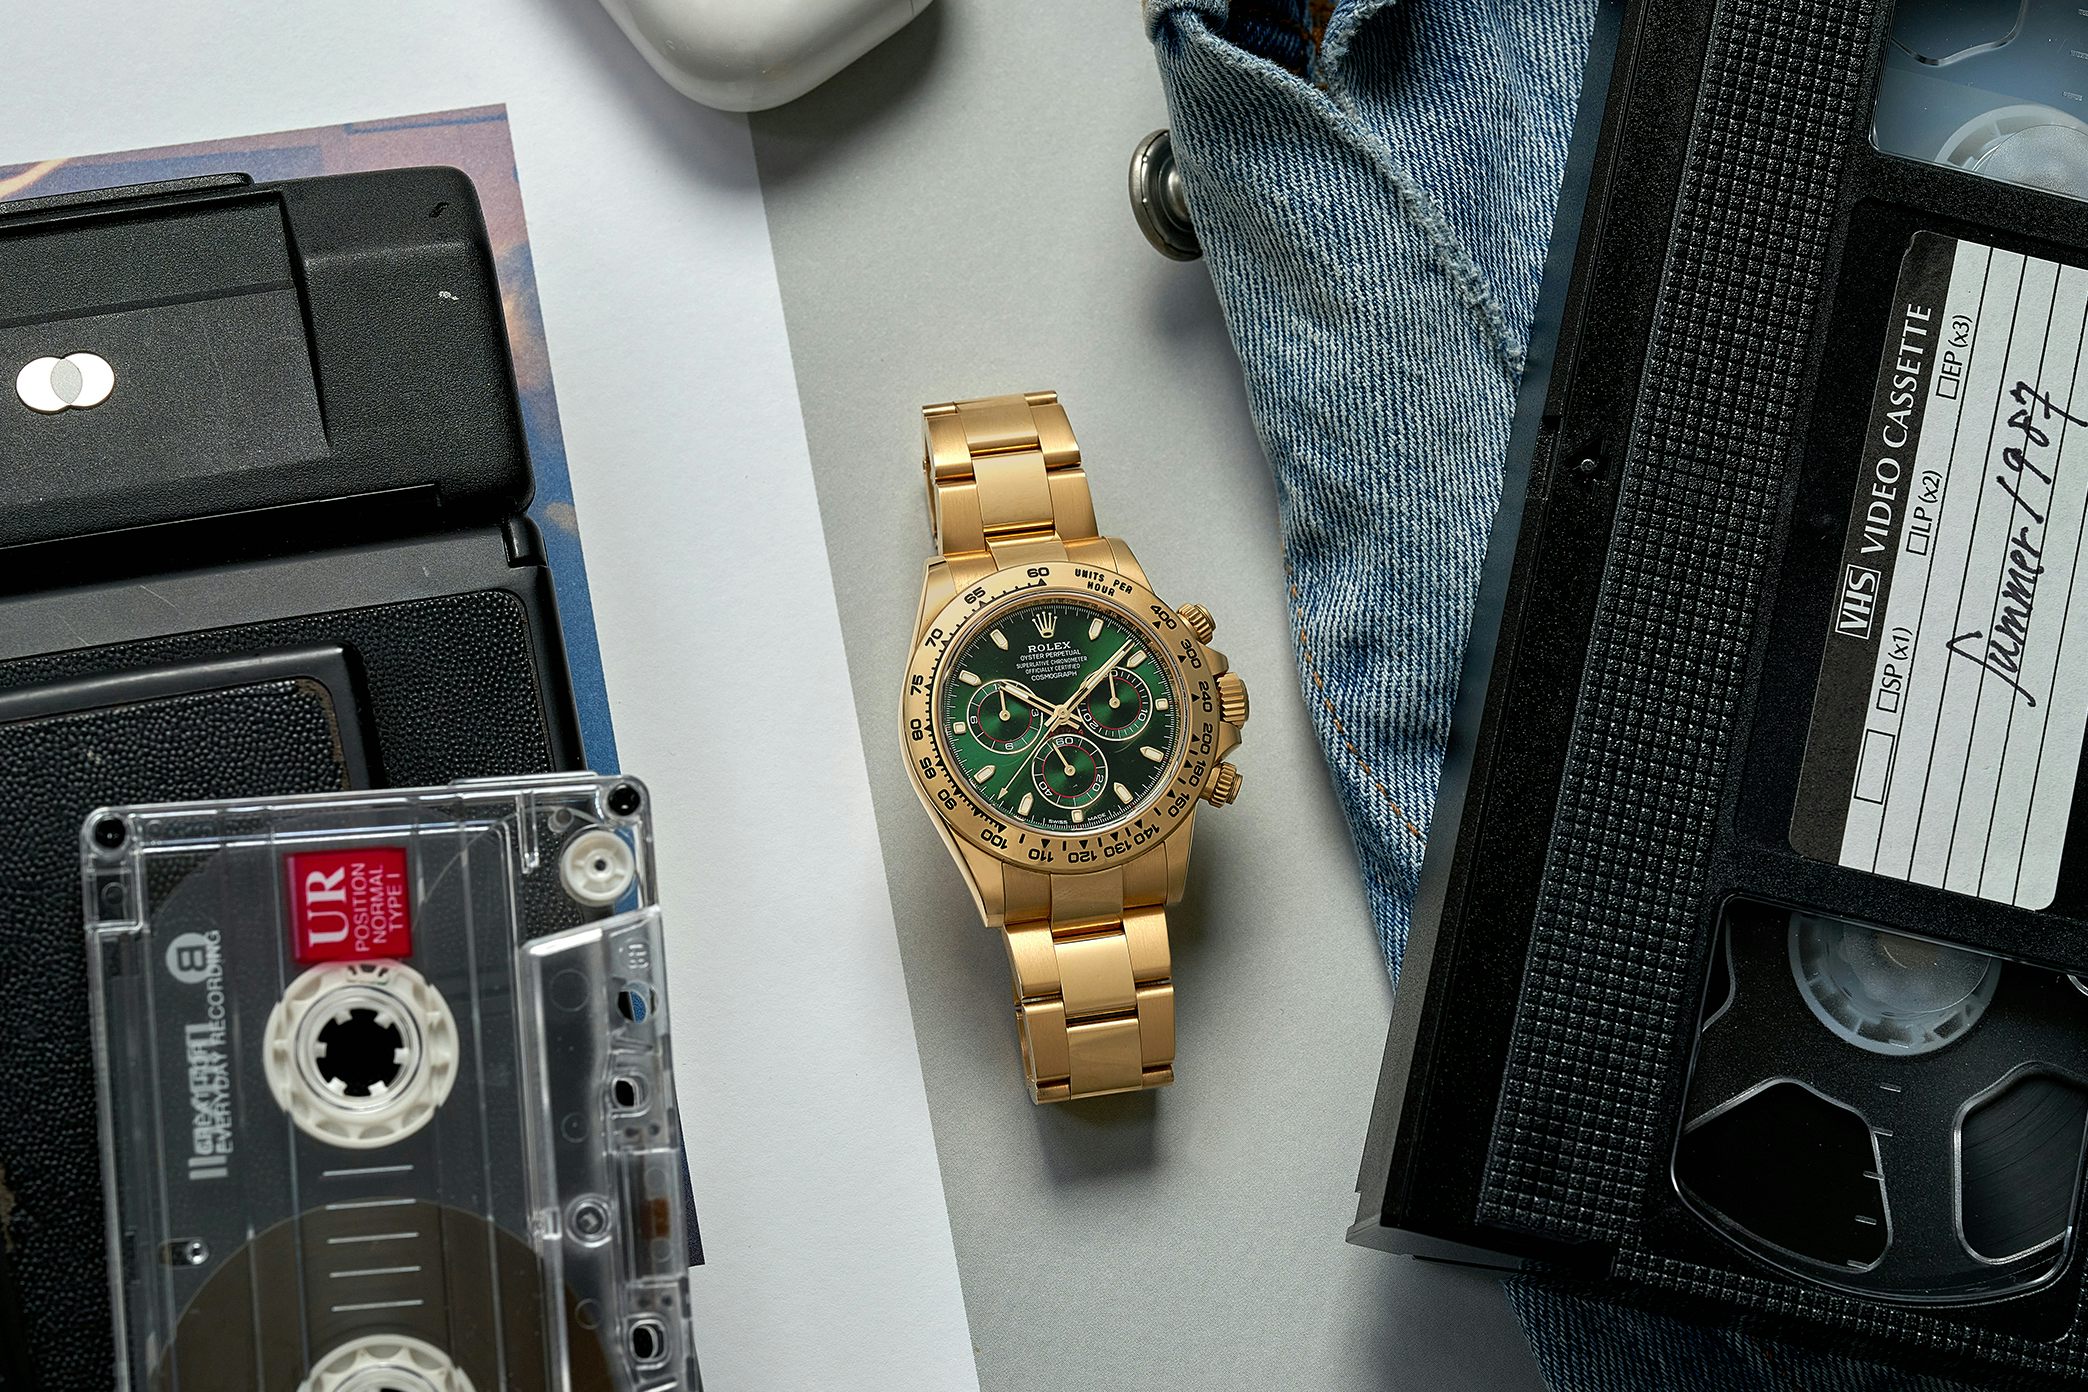 Pre-Owned Picks: A Grand Seiko Ginza Limited Edition, An Audemars Piguet  Royal Oak Chronograph, And A Rolex Daytona With Green Dial In 18k Yellow  Gold - Hodinkee